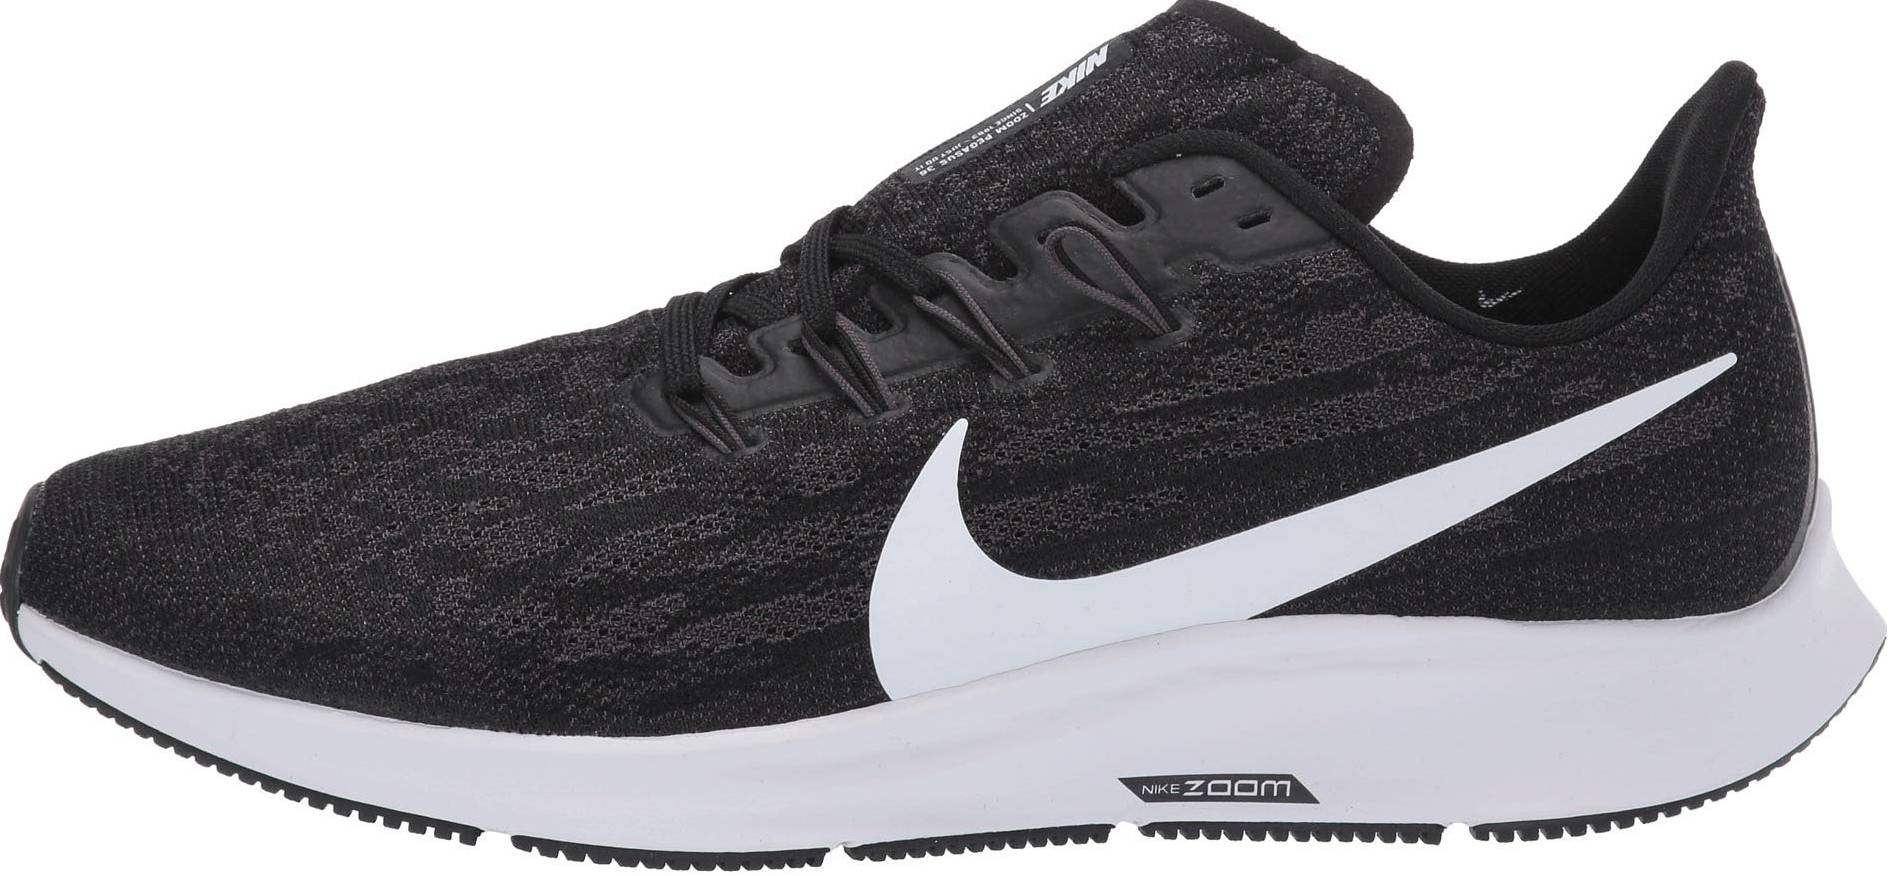 Save 42% on Nike Running Shoes (246 